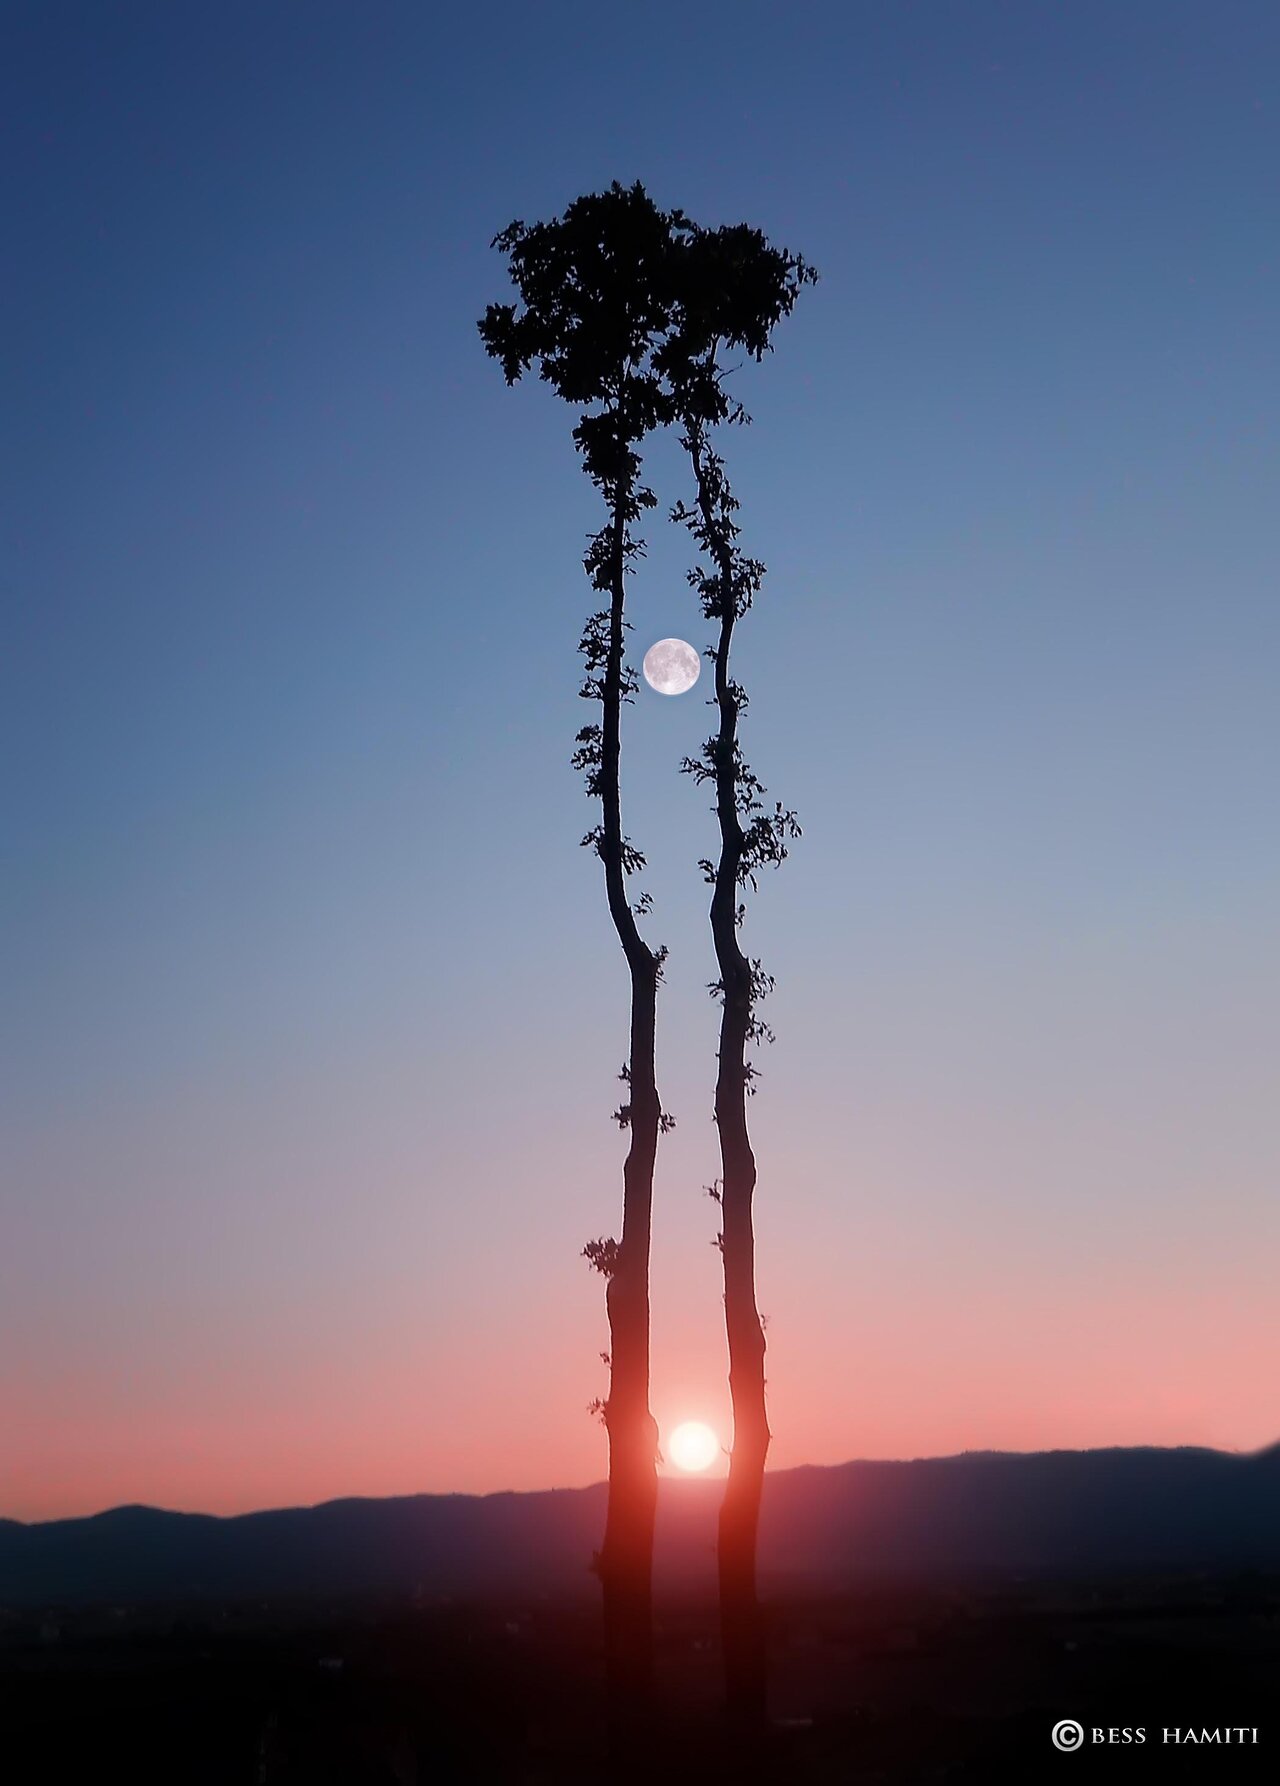 Fake image of the Sun and Moon